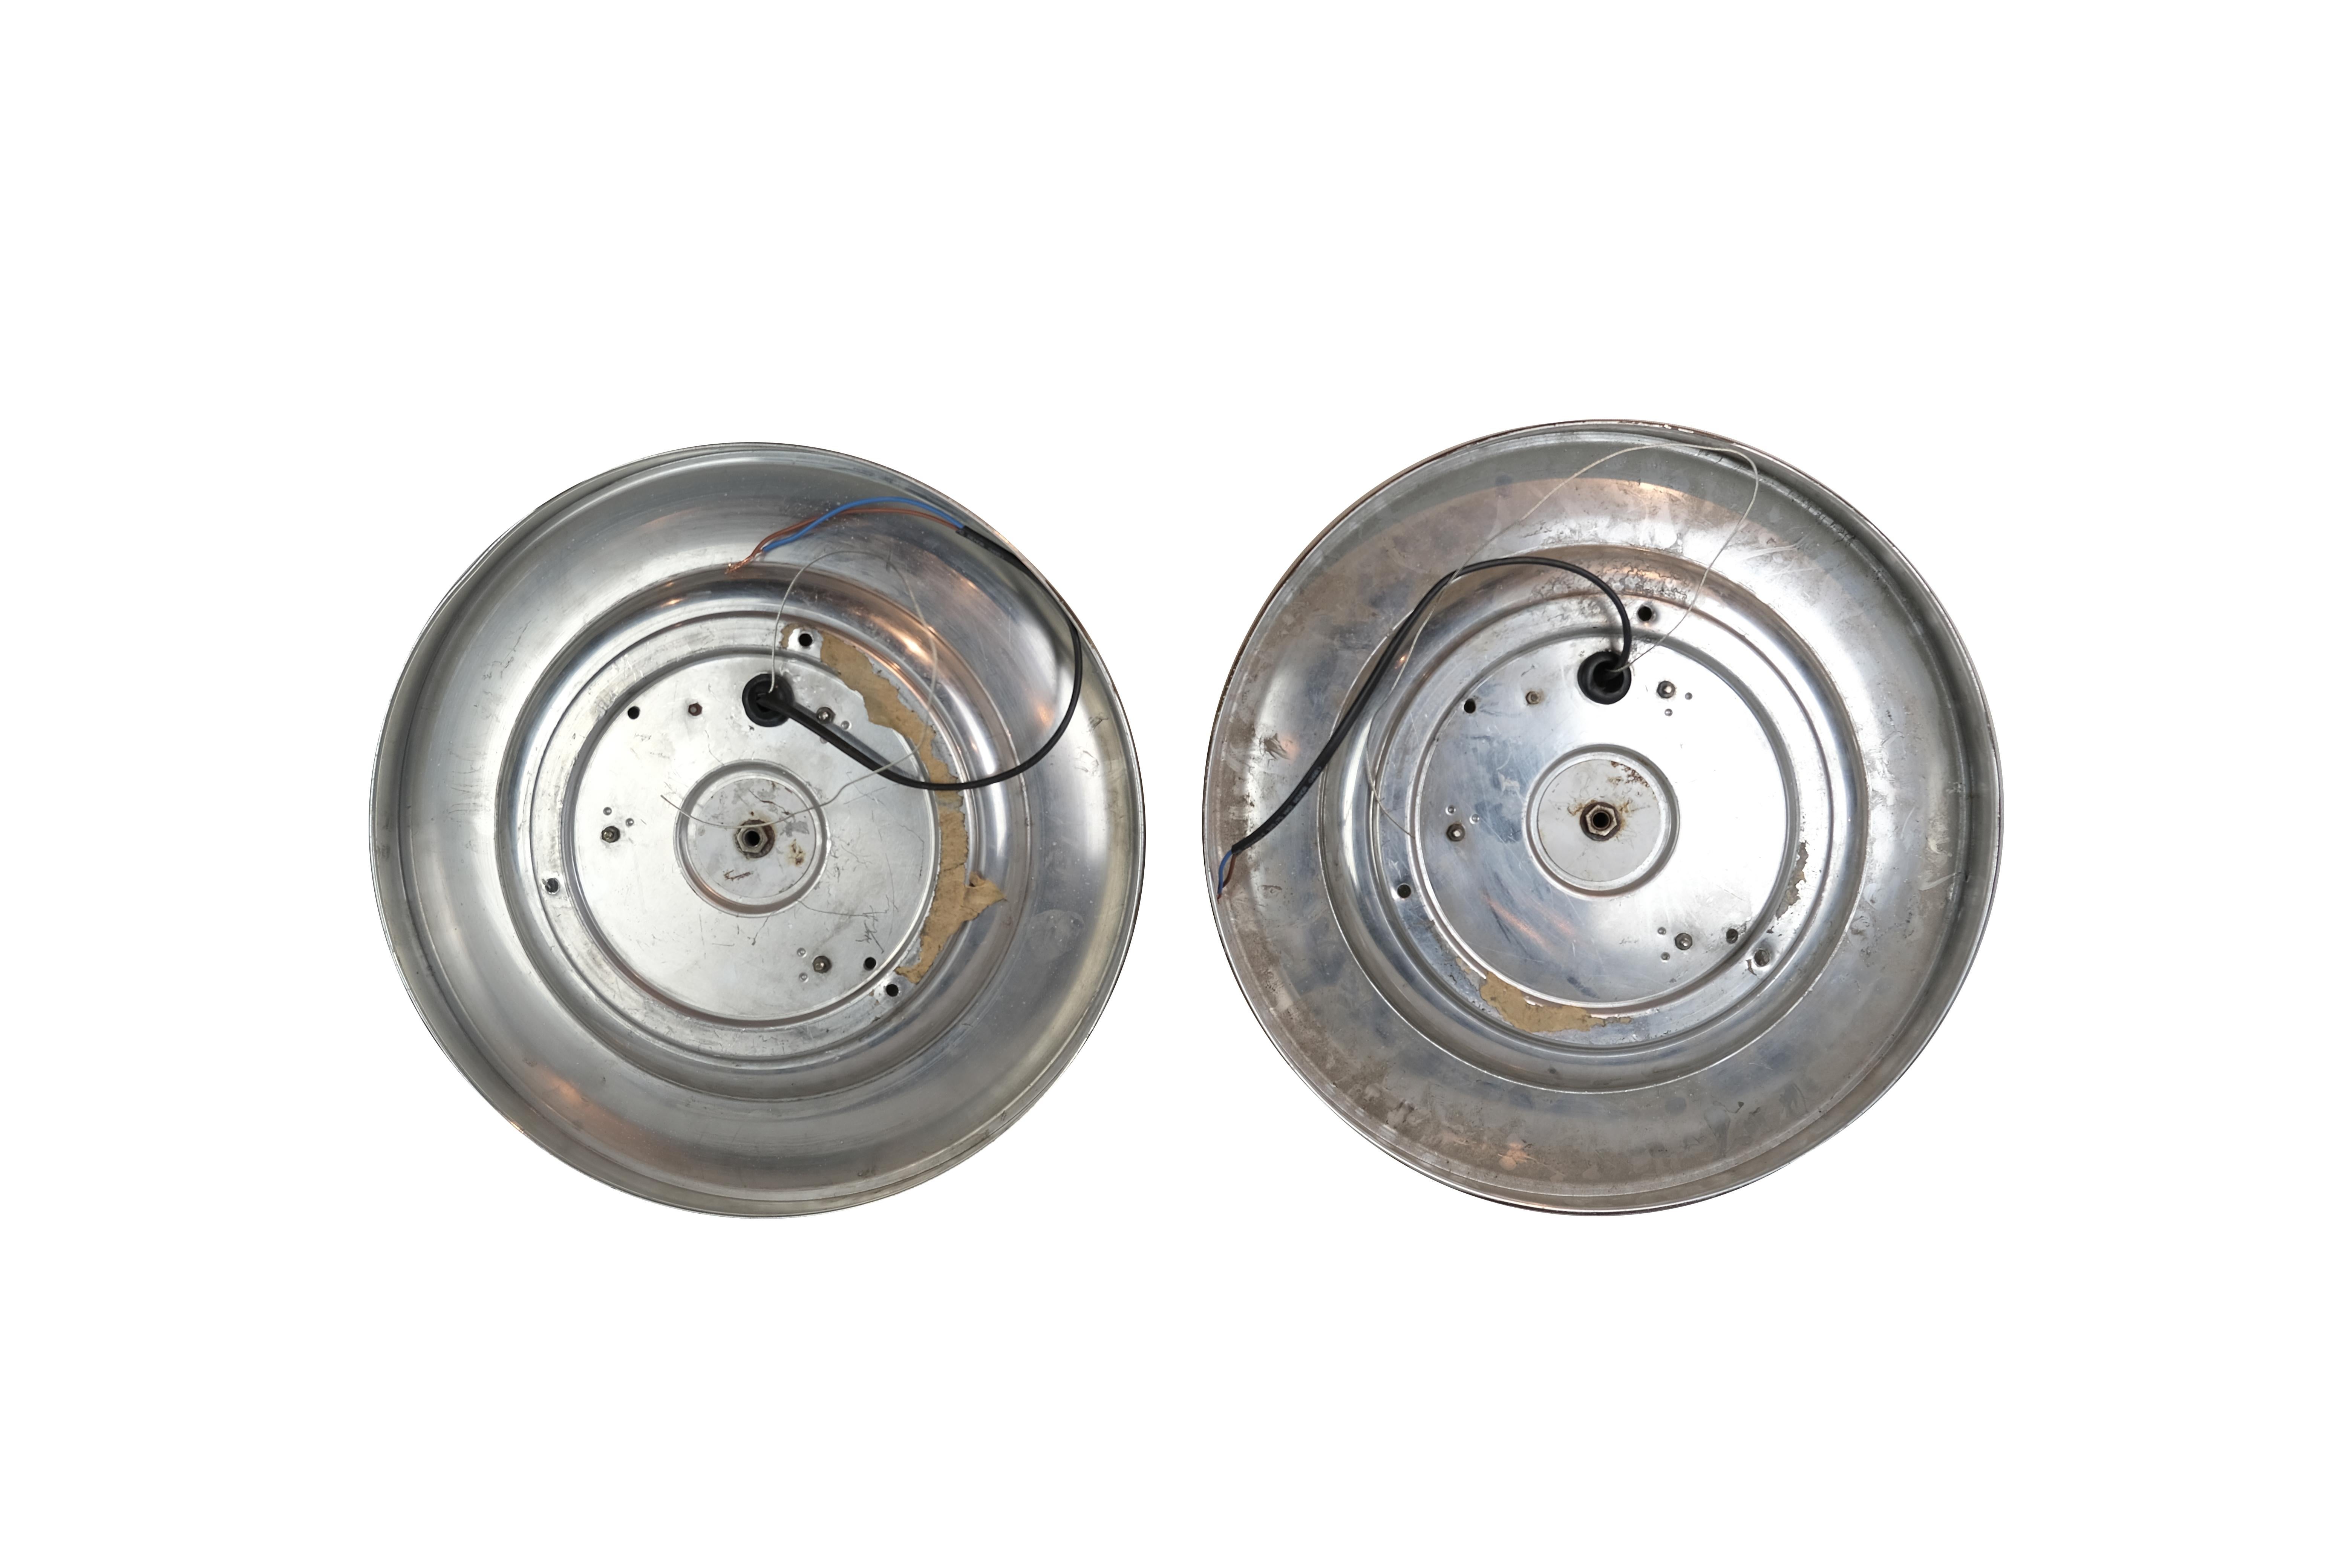 Two Pairs of round disk French wall sconces or ceiling lights with a geometric patterned convex molded glass shade surrounded by a brass rim. Each pair is priced separately. Each fixture has three sockets.

Second pair of round disk sconces or